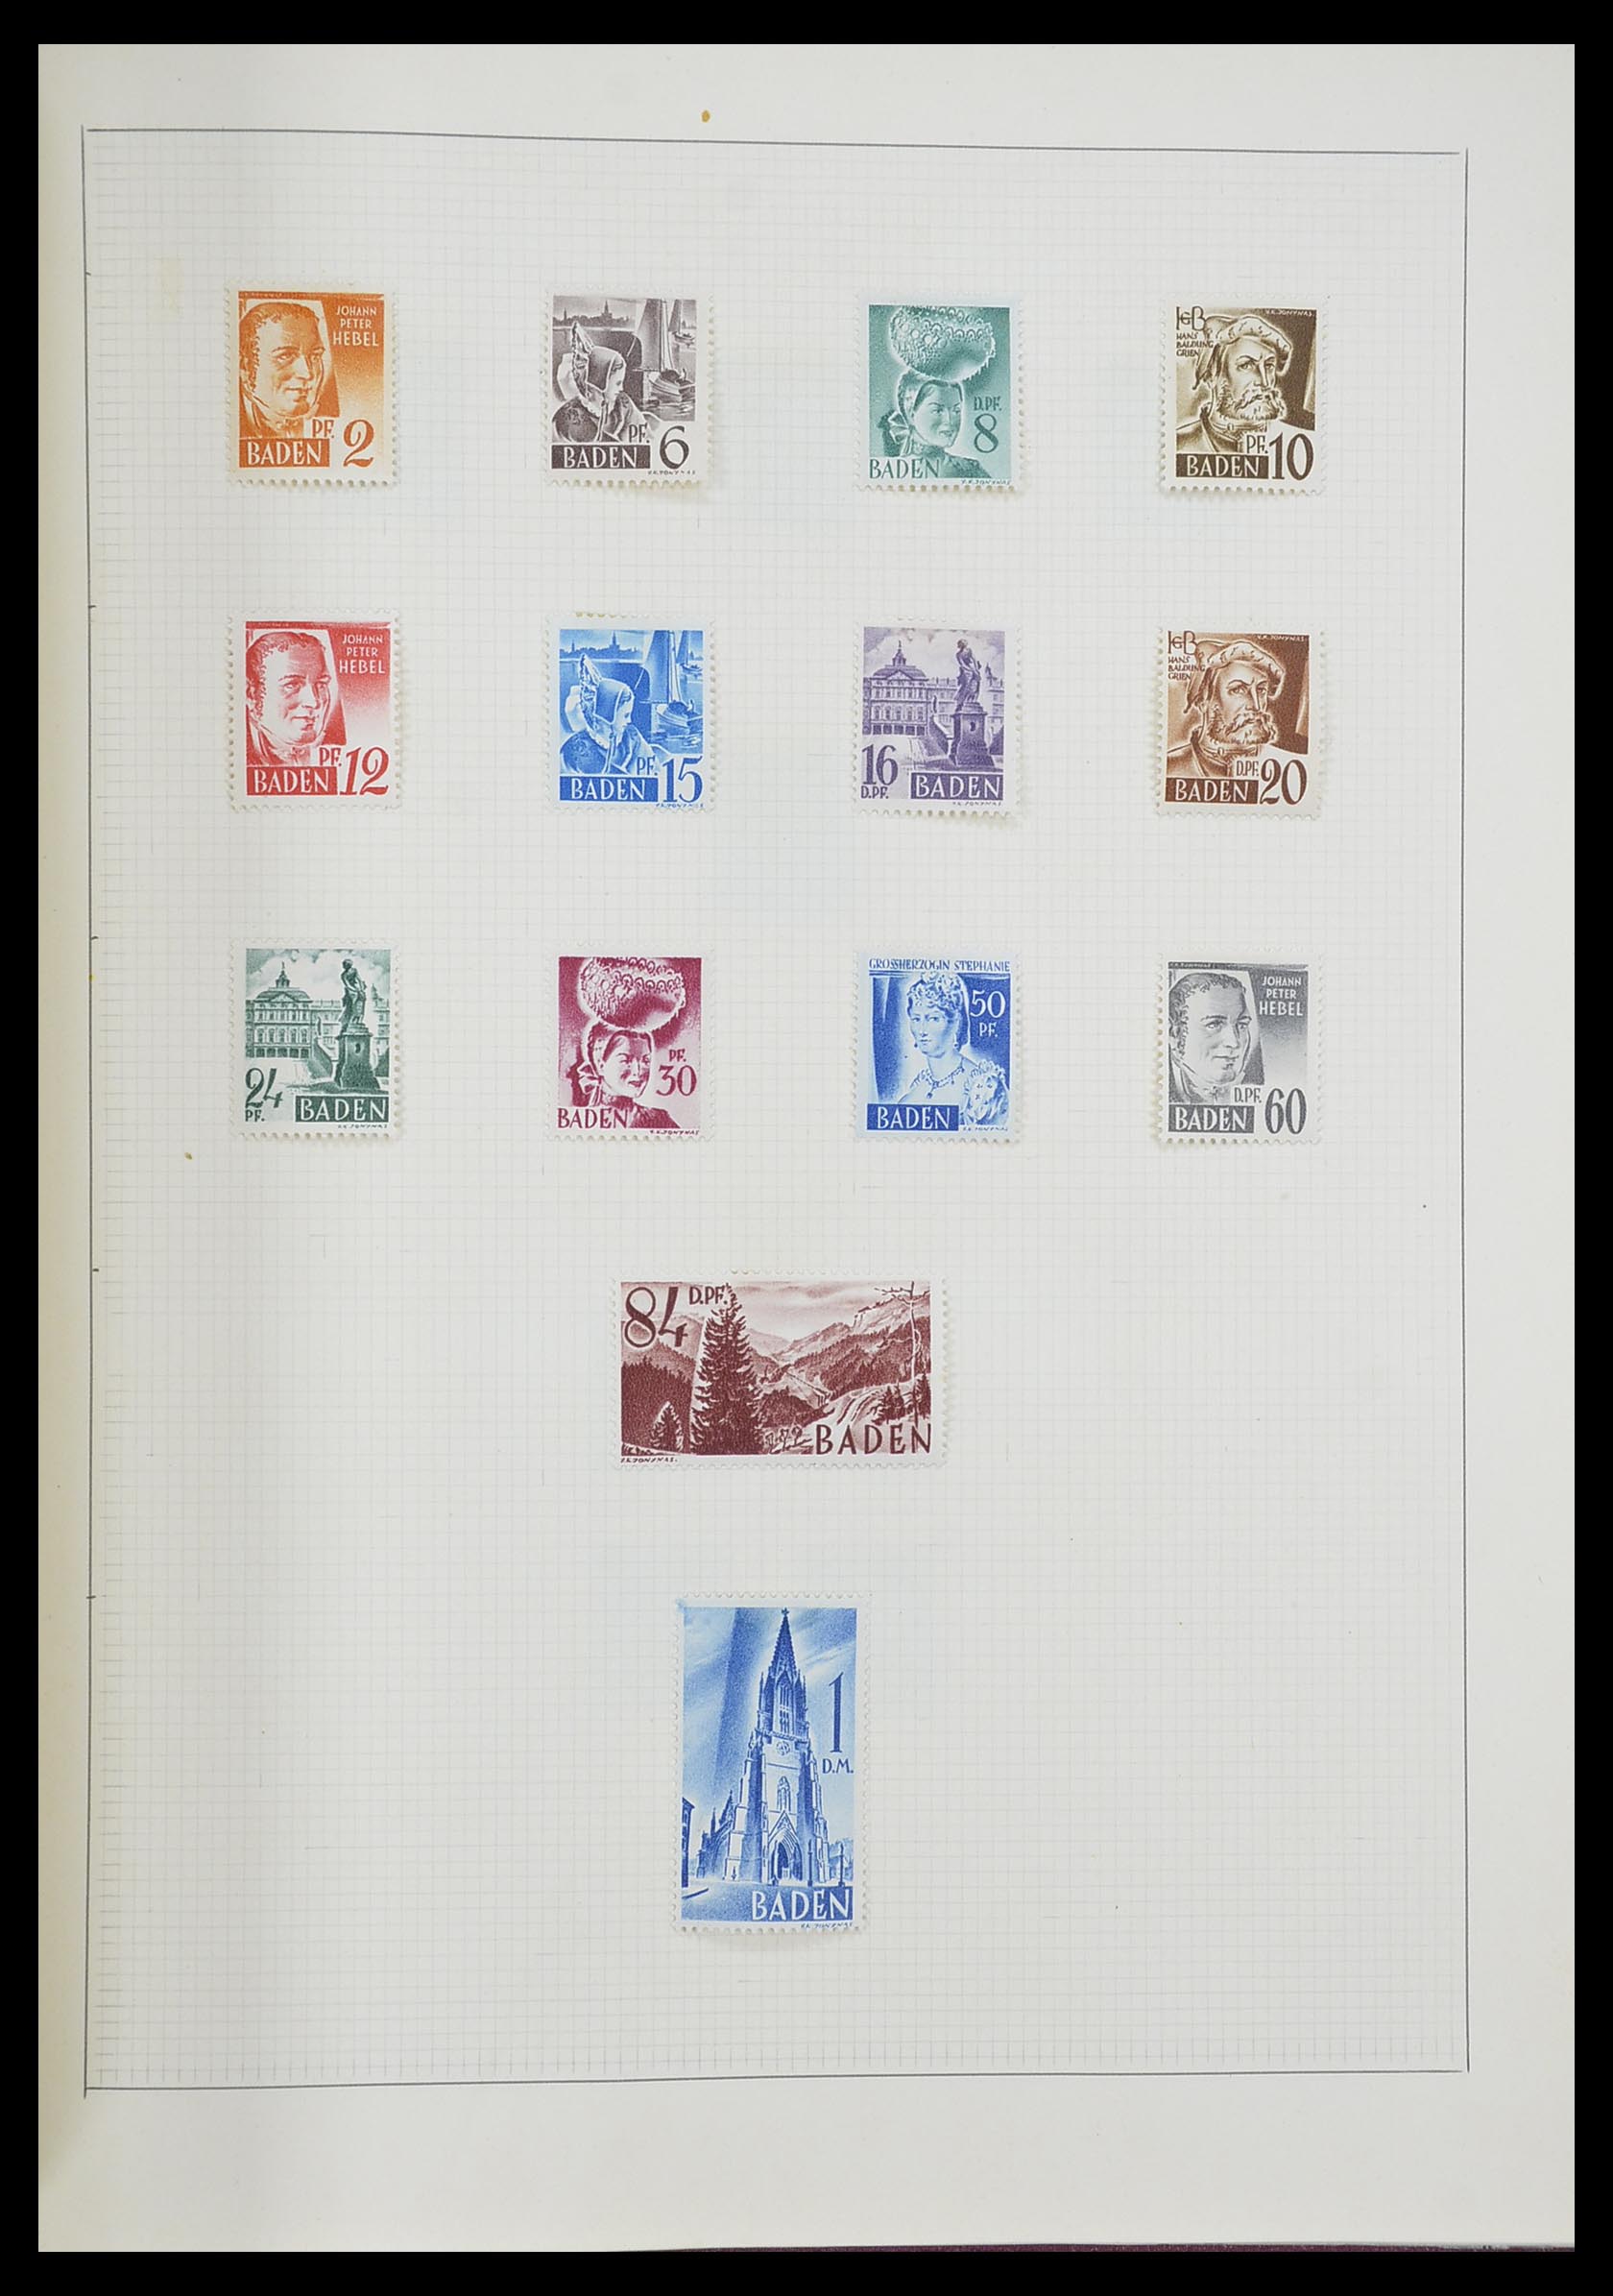 33406 072 - Stamp collection 33406 European countries 1938-1955.